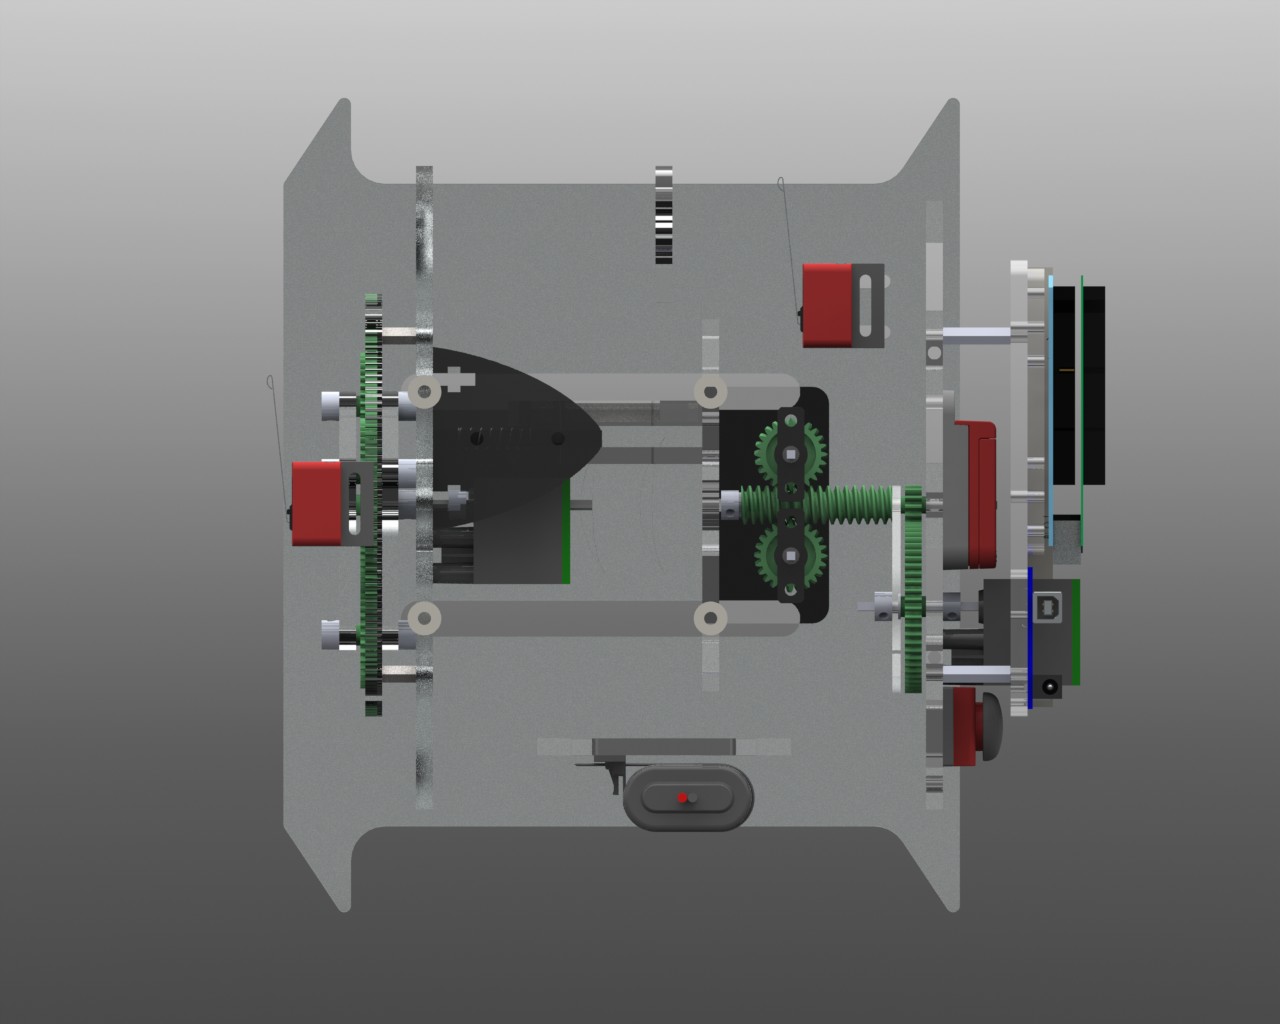 Cross-sectional view of the robot's internal components.